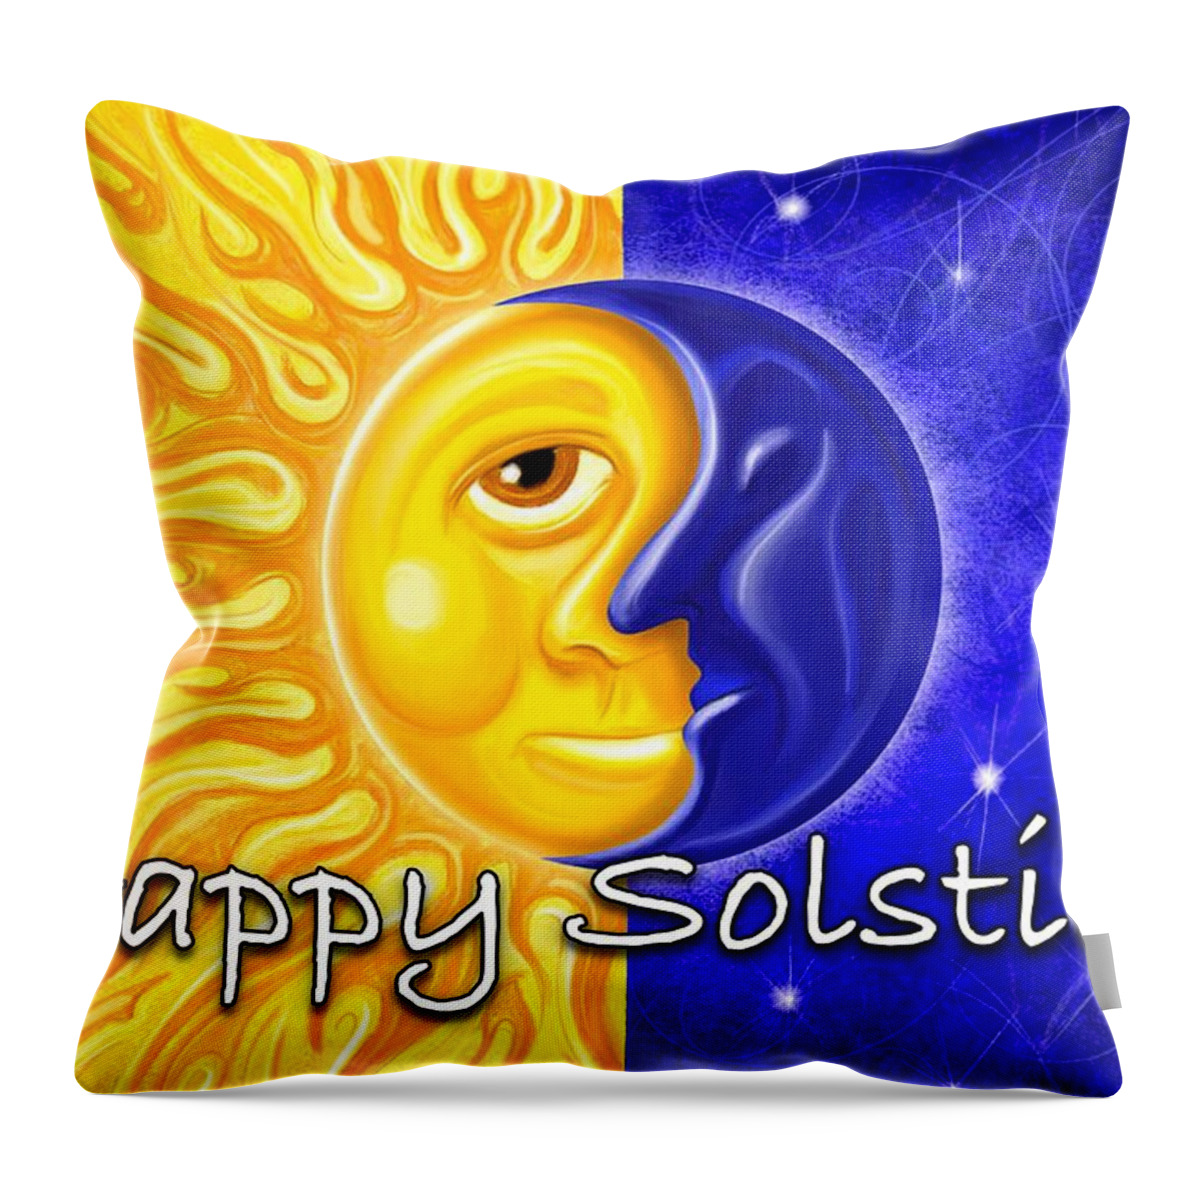 Solstice Throw Pillow featuring the digital art Solstice by David Kyte